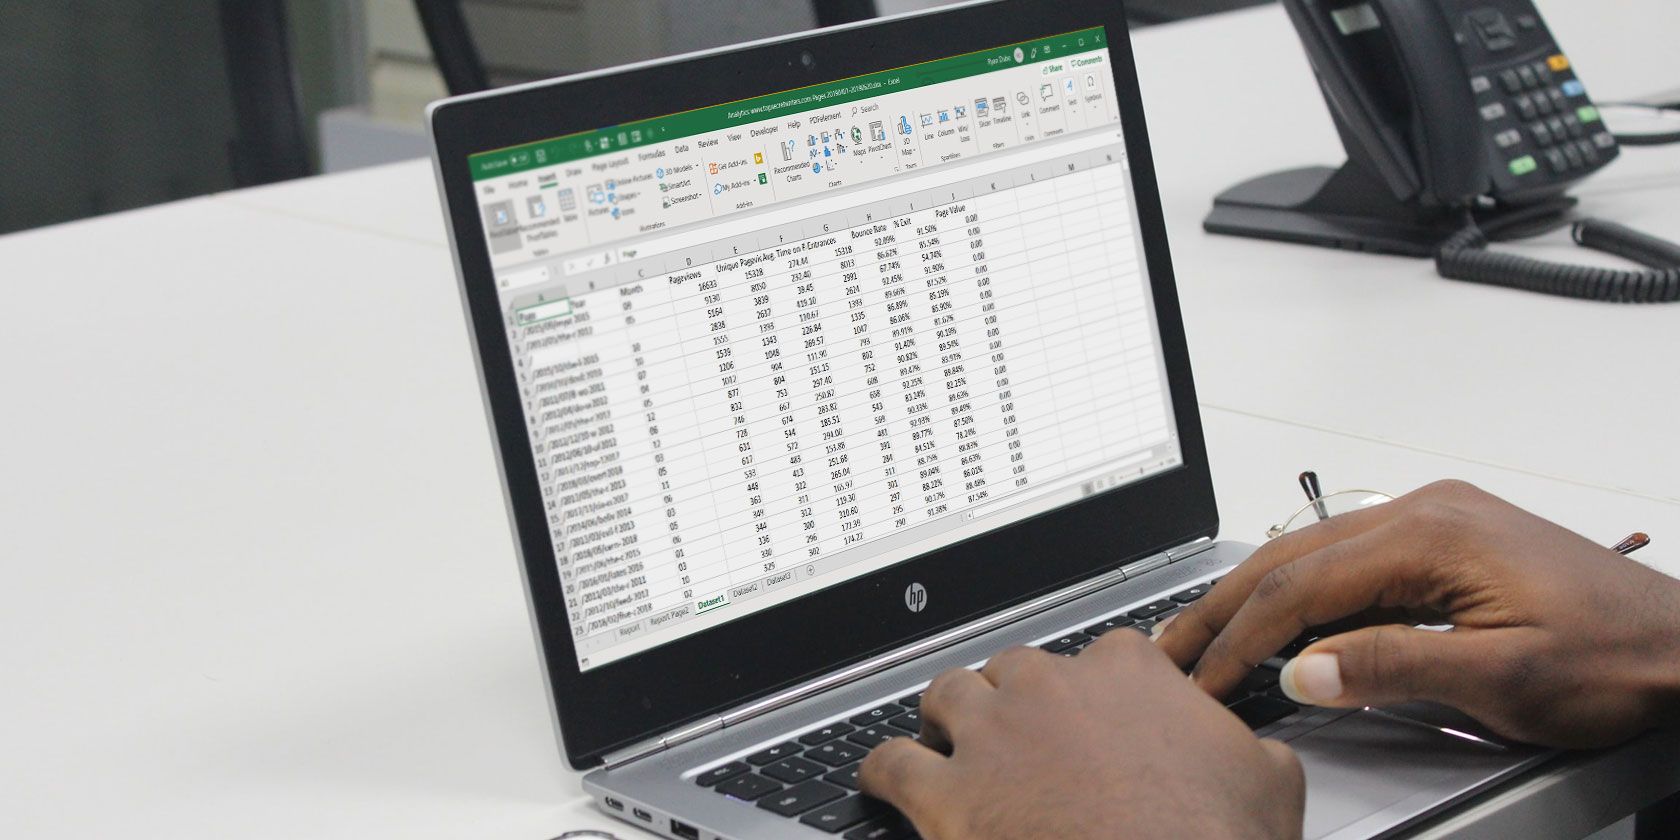 using Microsoft Excel on a laptop